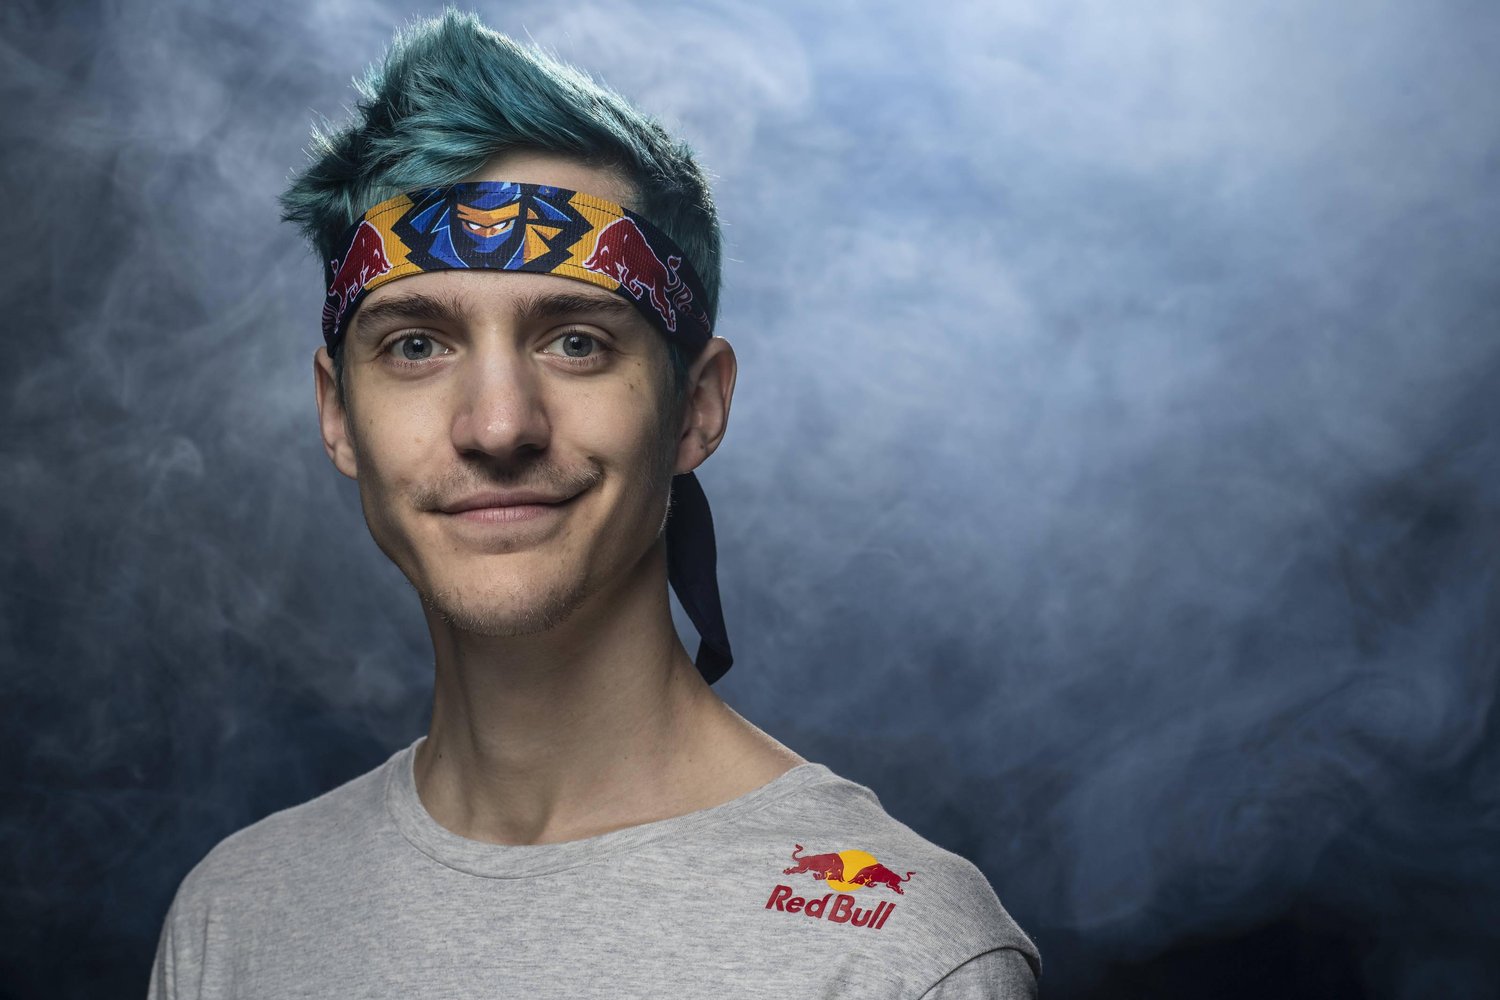 Ninja has talked about the upcoming Fortnite event